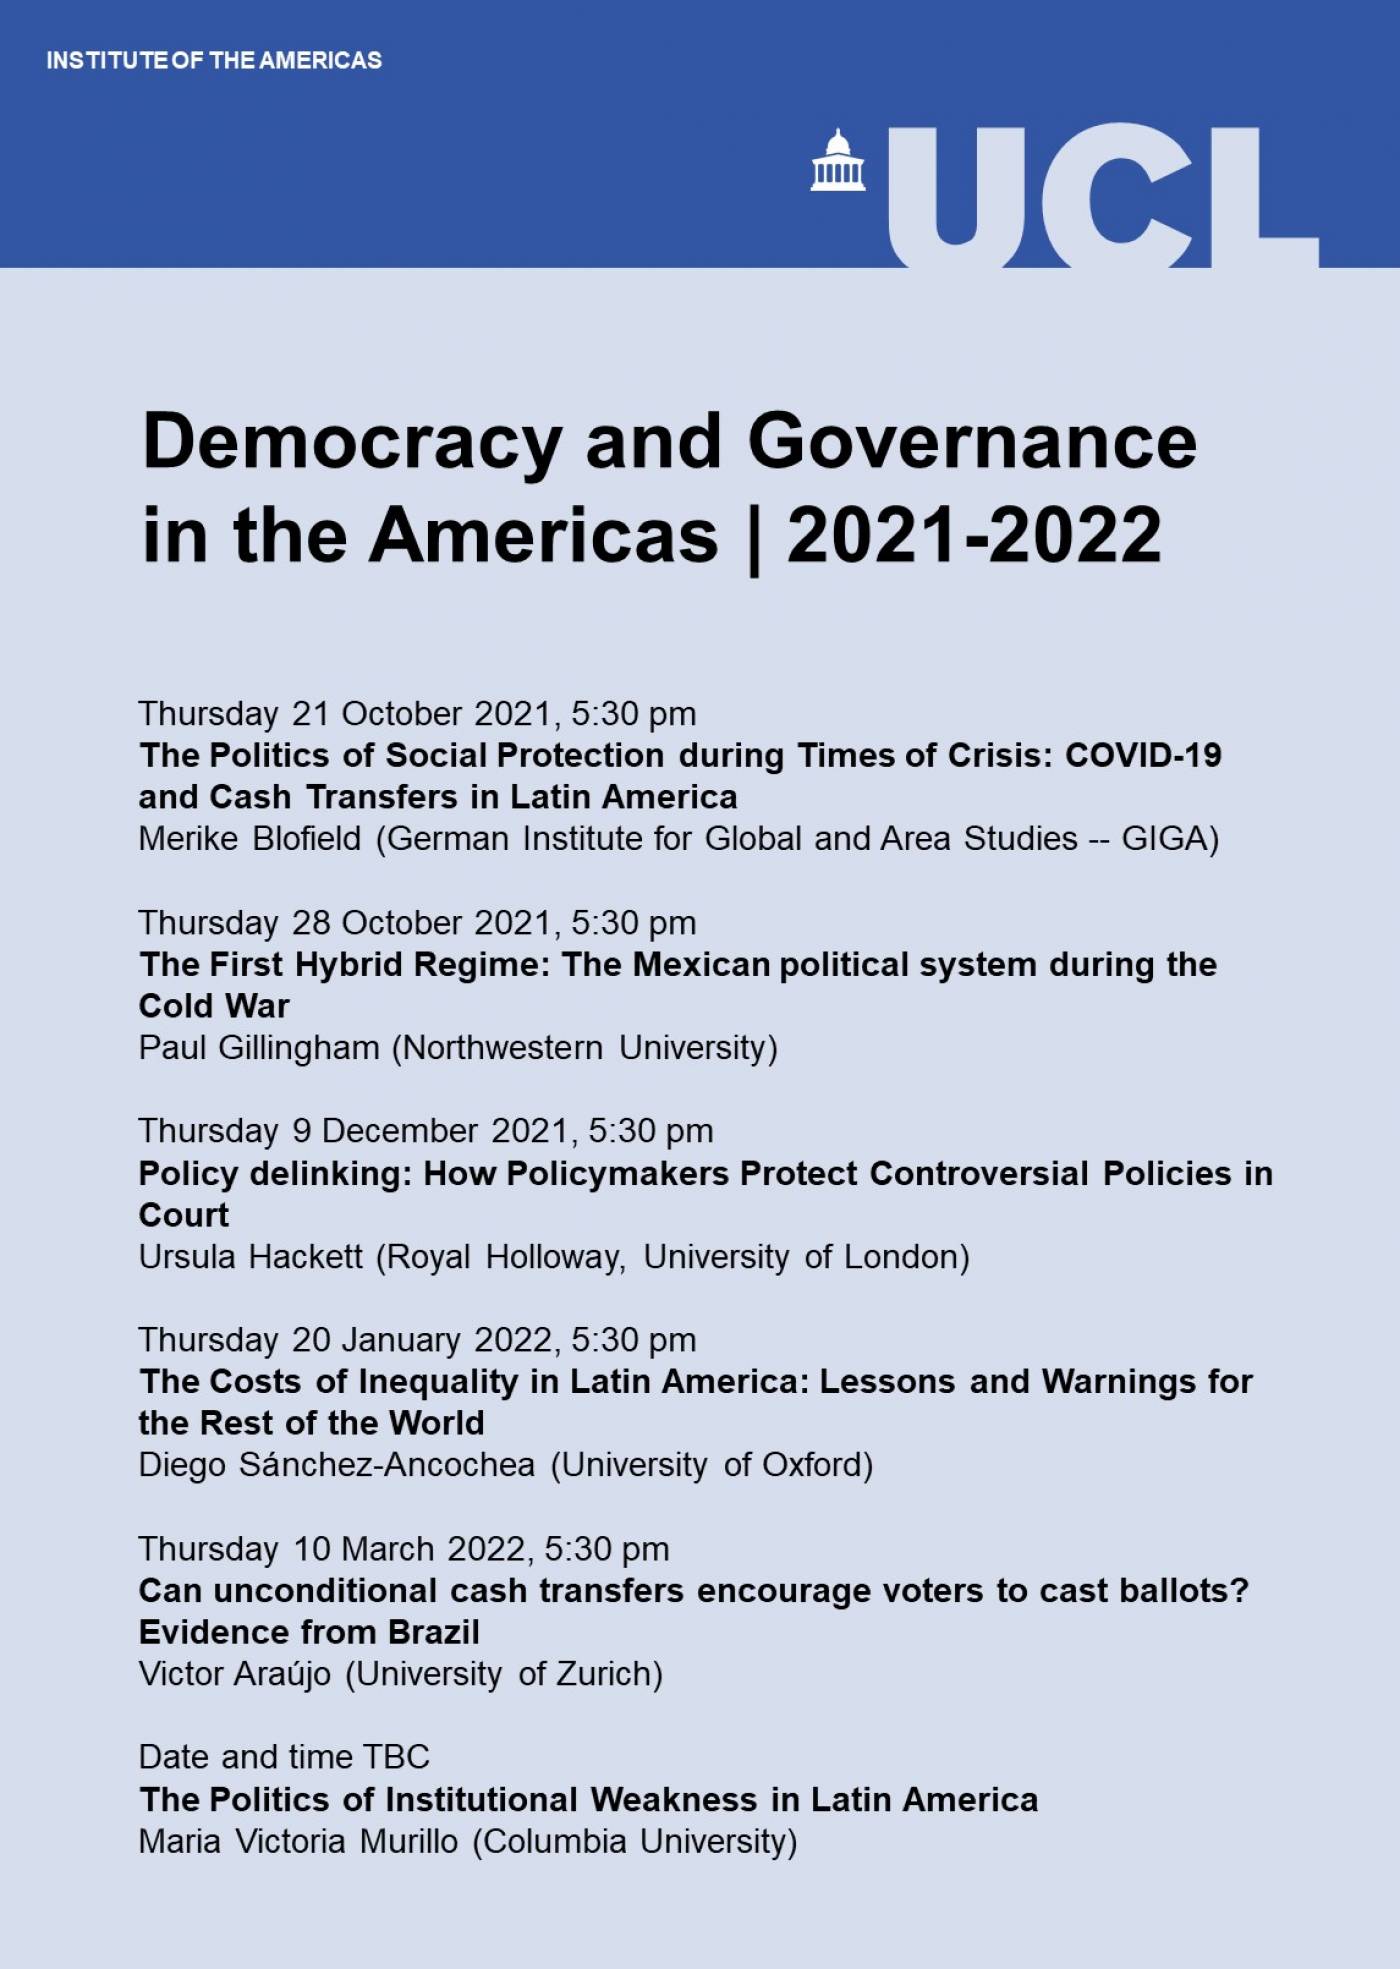 Democracy and Governance in the Americas event series calendar 2021-2022